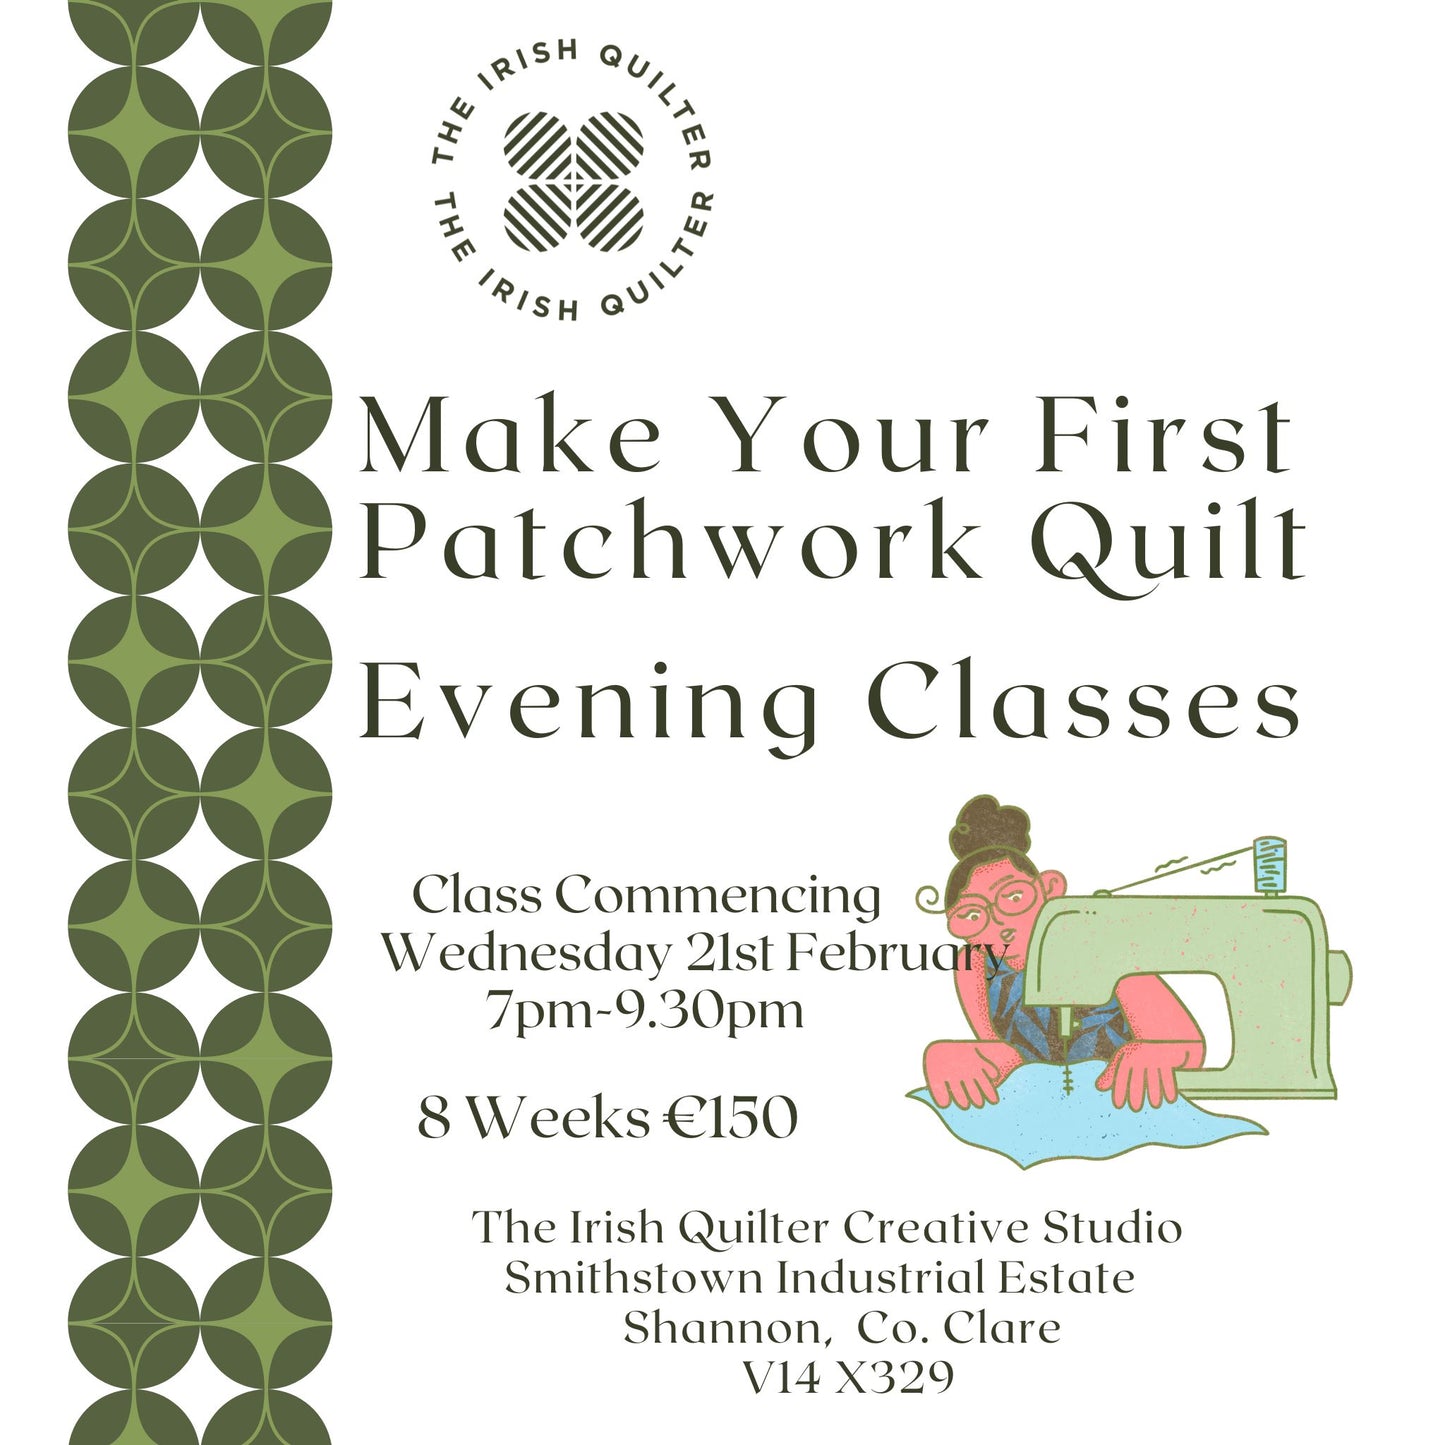 Make your First Patchwork Quilt Wednesday Evening Classes